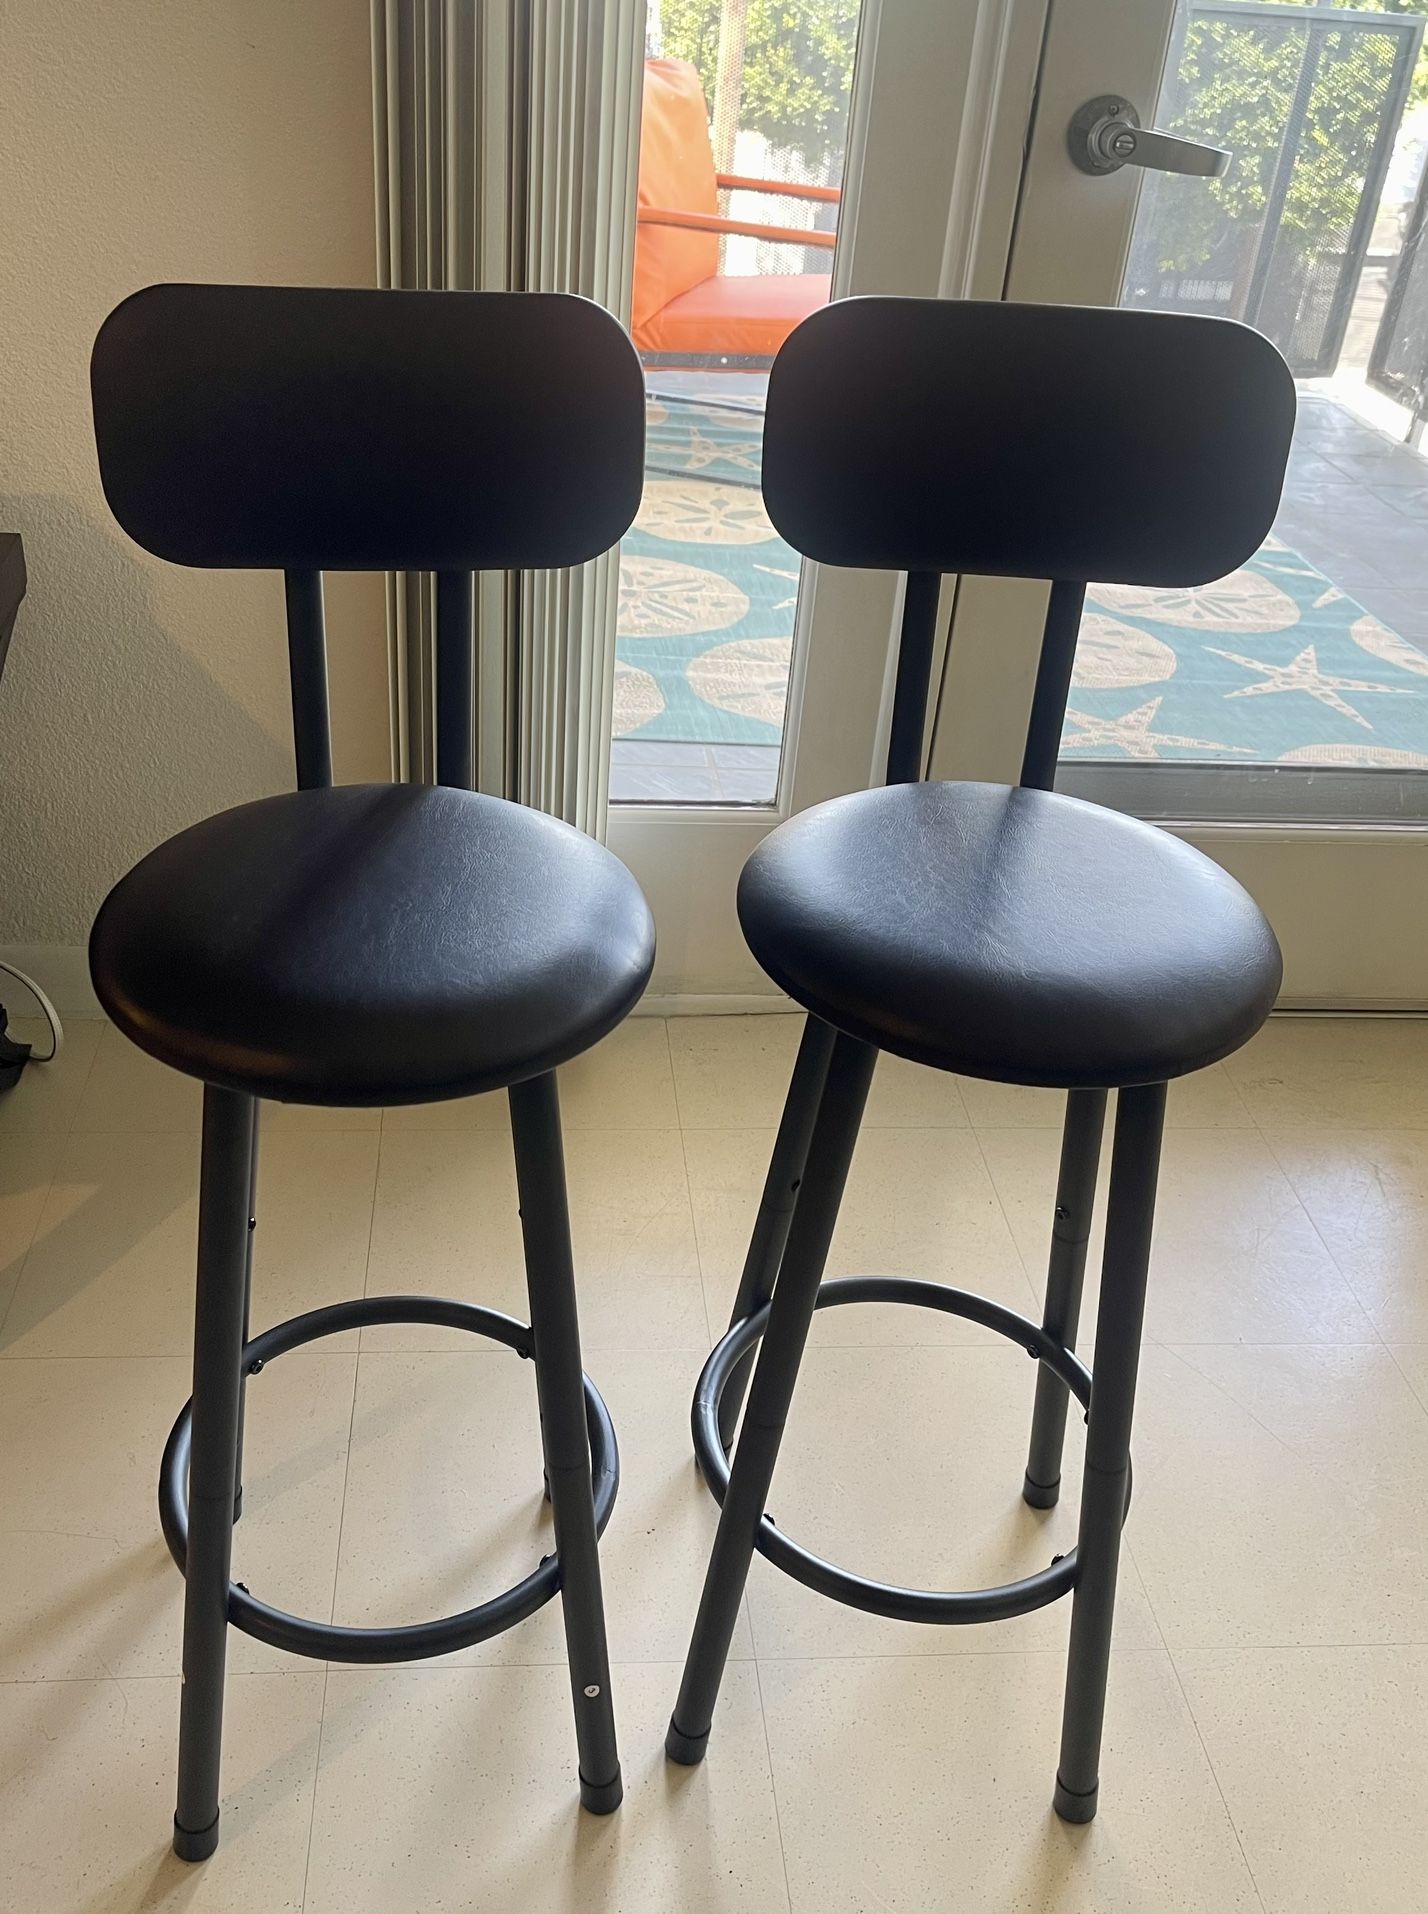 Small expresso Stools